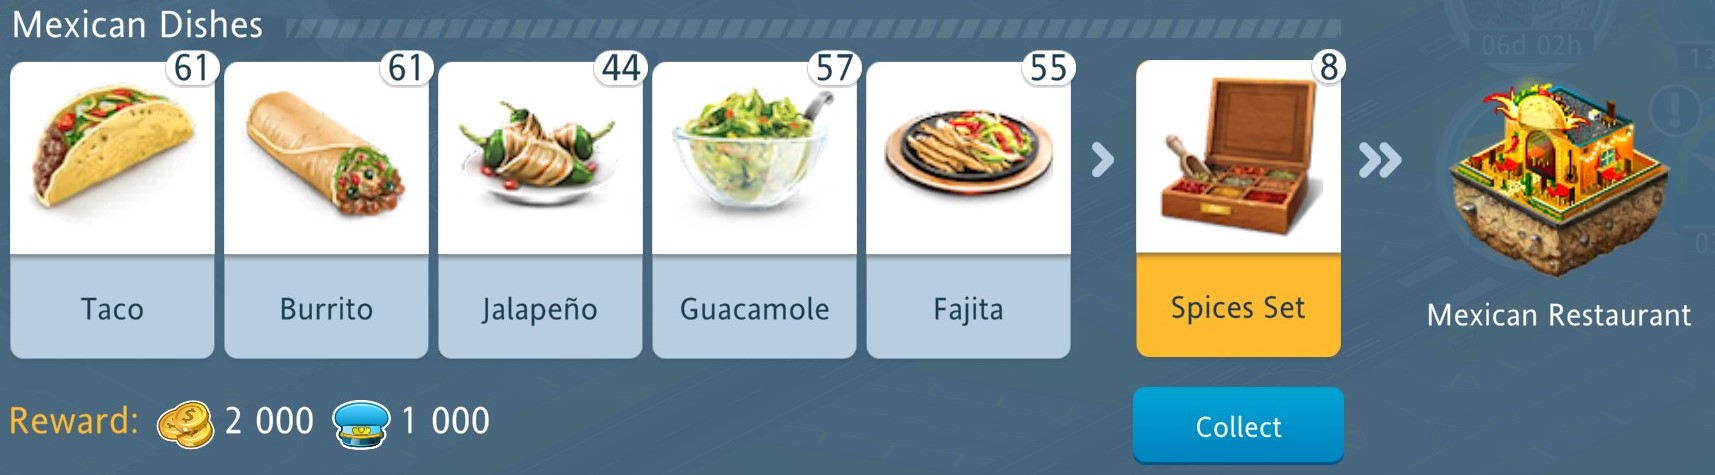 mexican dishes.jpg